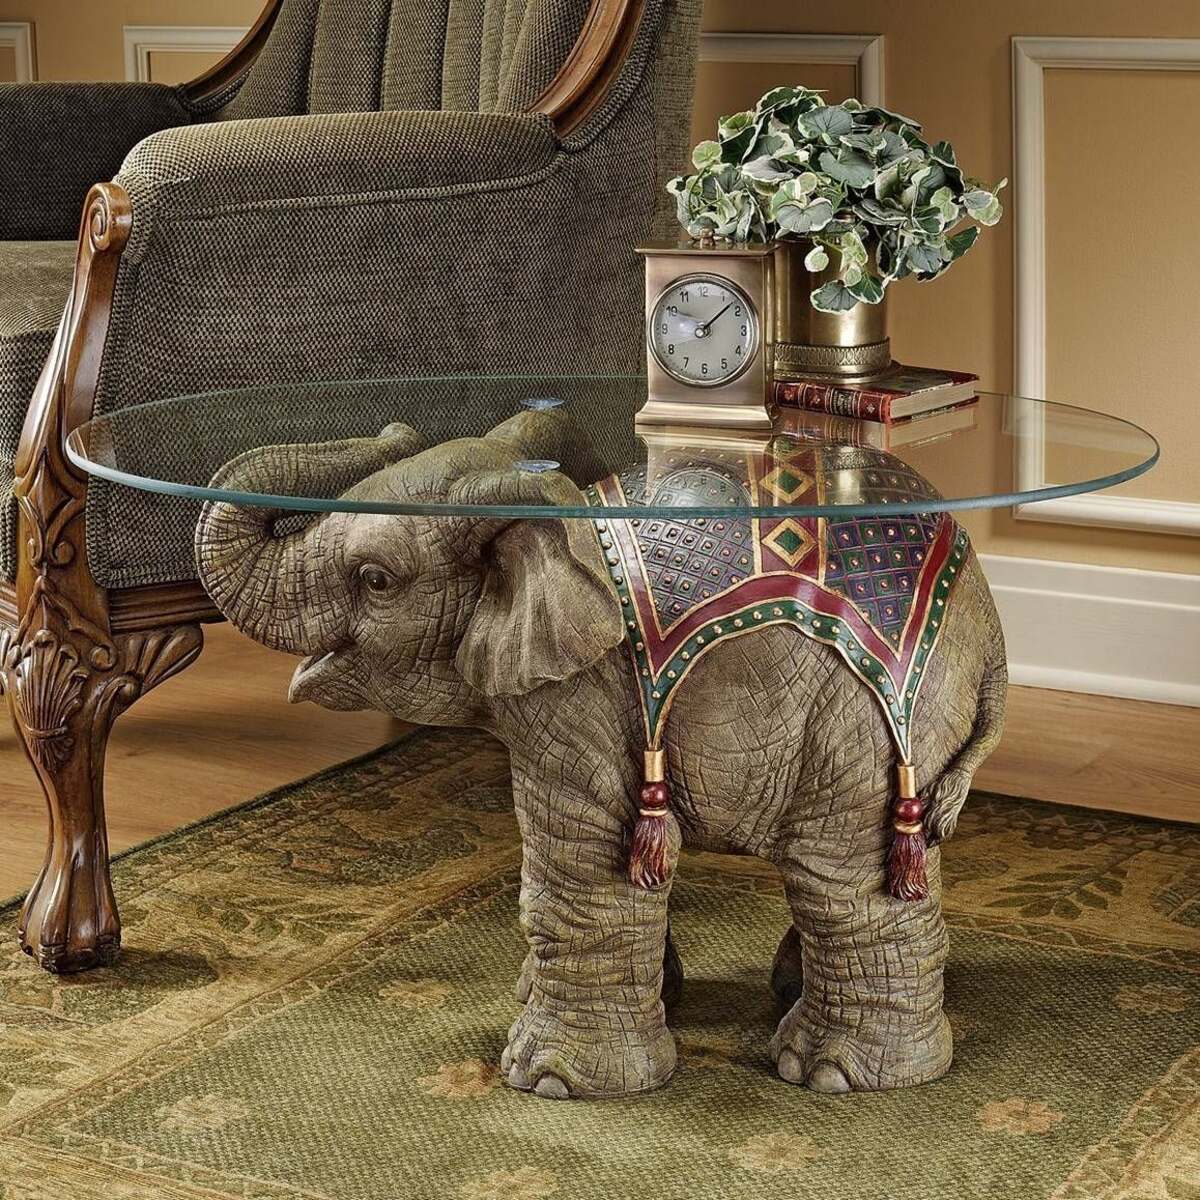 Home Decor: Why Are Elephants Trending